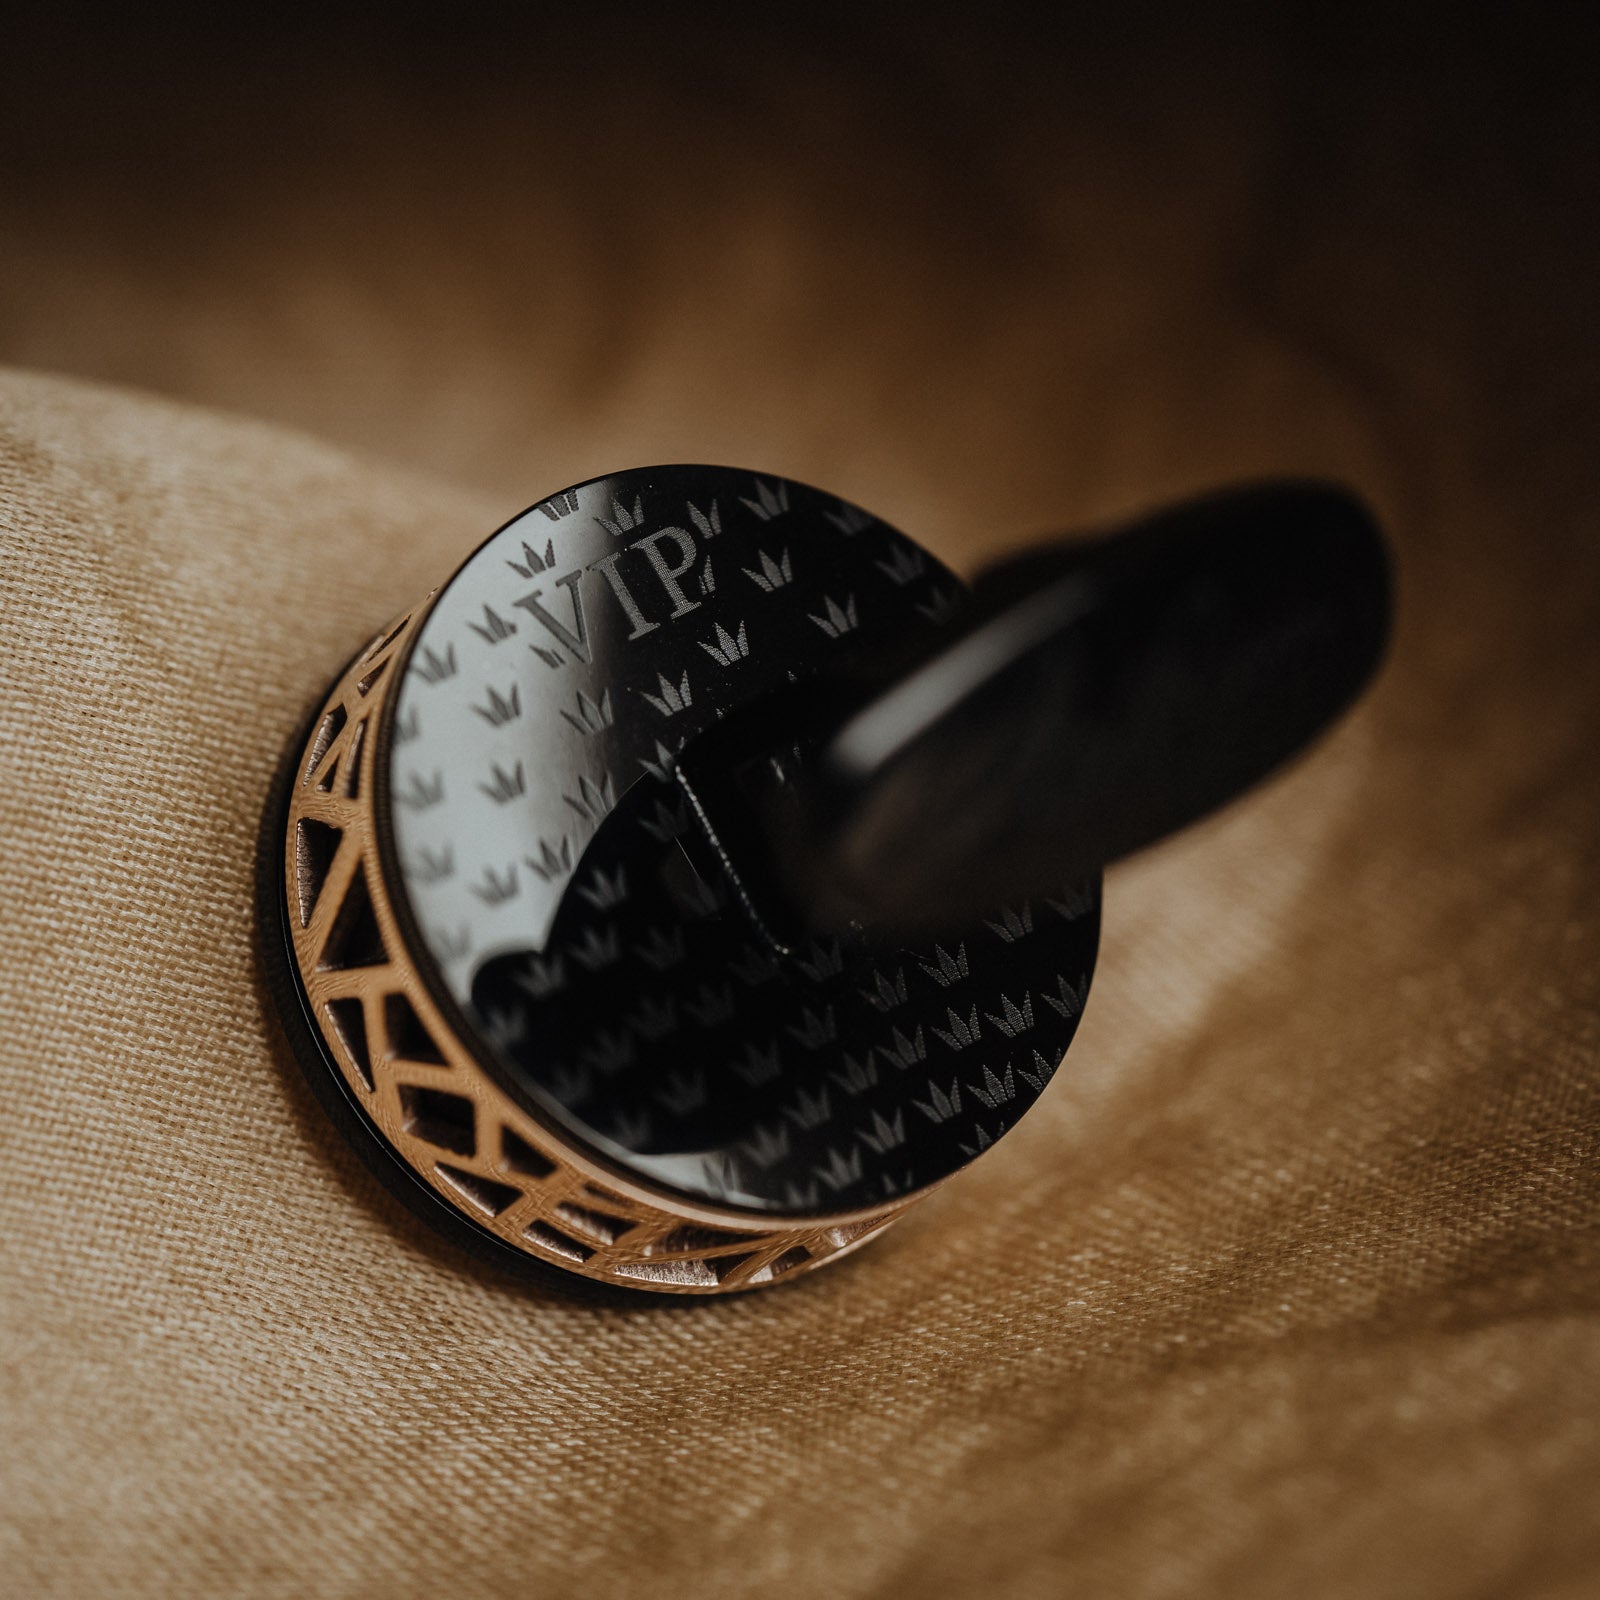 The French Black Gold Cufflinks